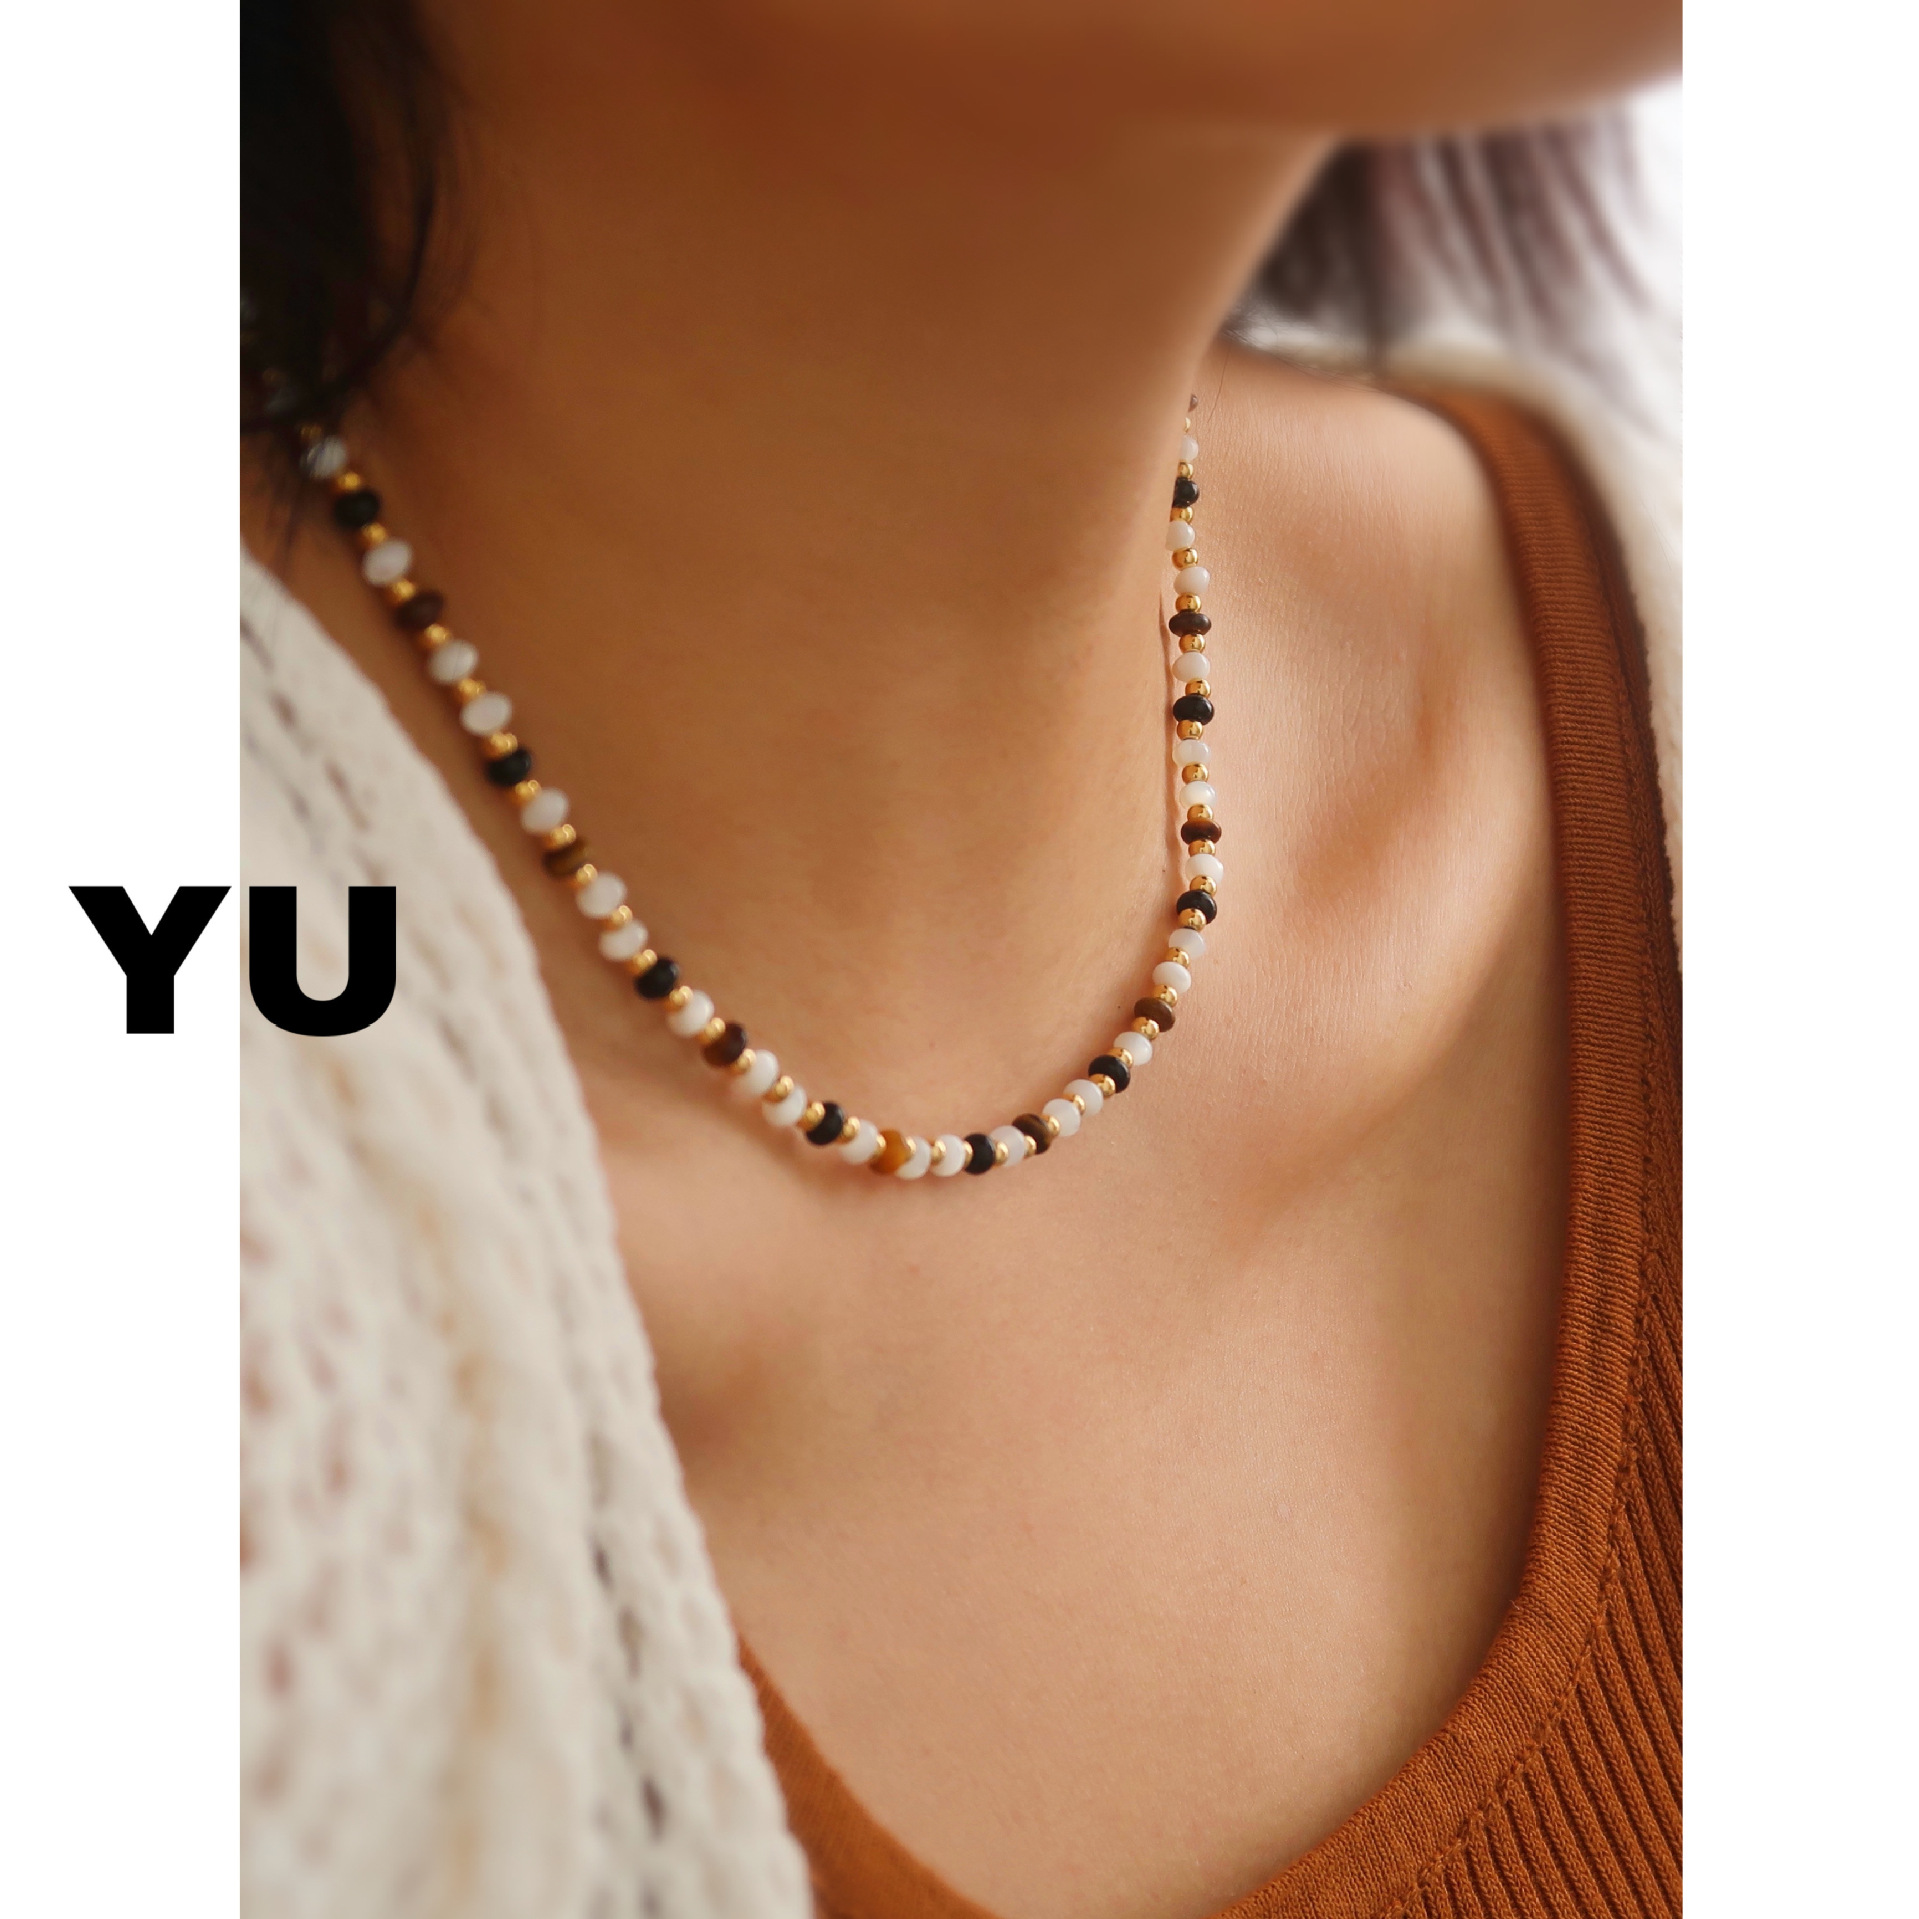 Heyu Ornament Natural Stone Crystal Black and White, Colored Beaded Necklace Bracelet Titanium Steel Tigereye Black Agate Clavicle Chain